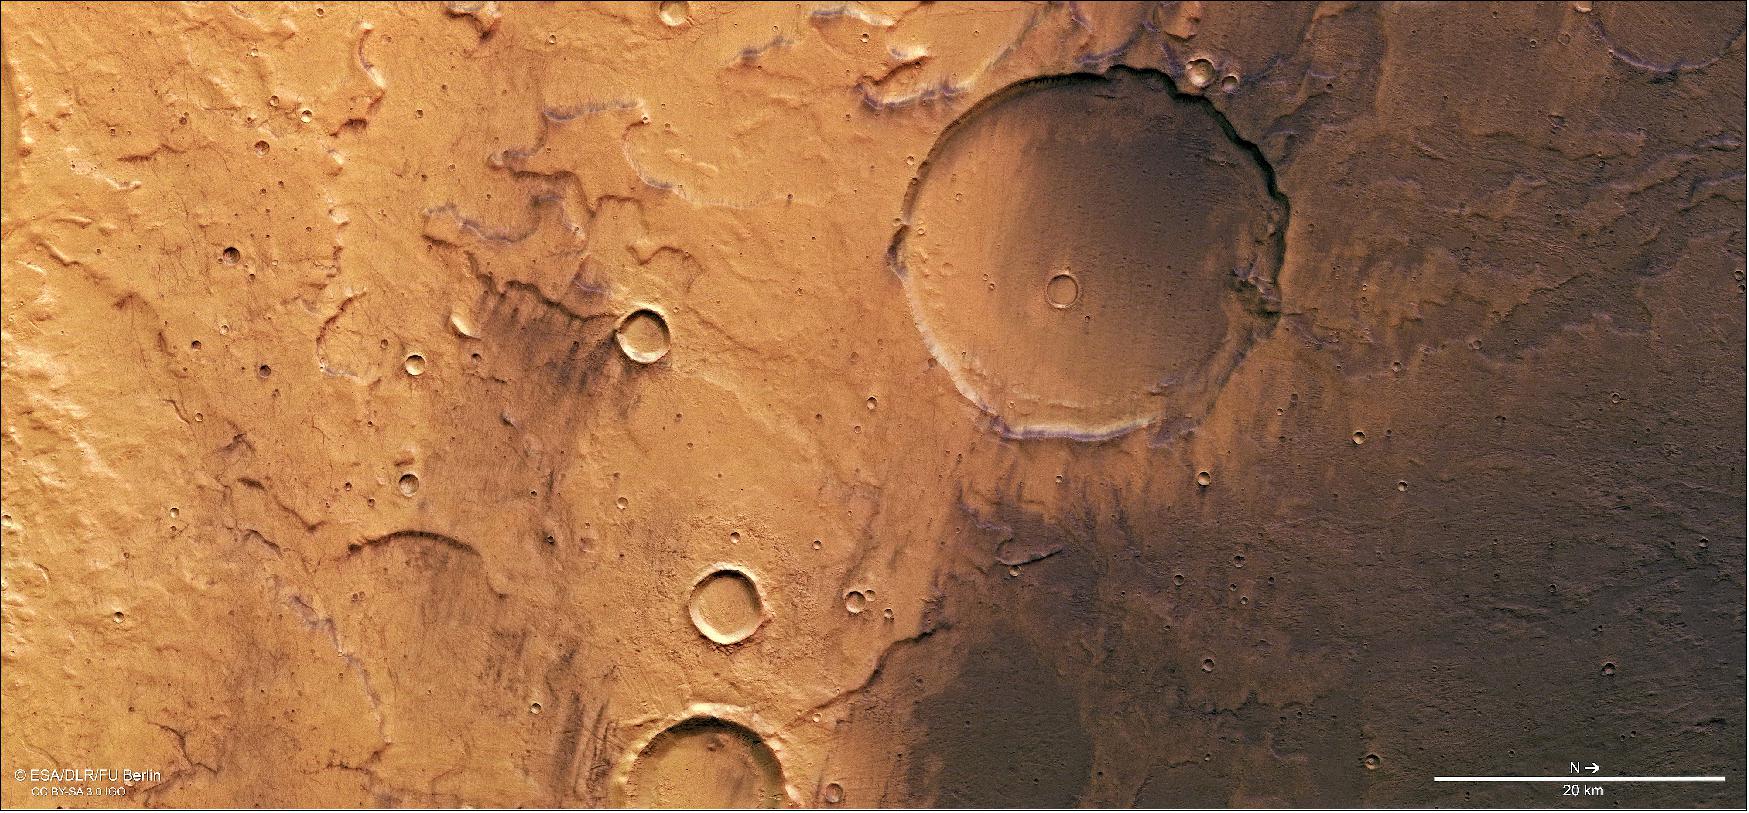 Figure 20: This image from ESA's Mars Express shows Terra Cimmeria, a region found in the southern highlands of Mars. It comprises data gathered on 11 December 2018 during Mars Express orbit 18904. The ground resolution is approximately 13 meters per pixel and the images are centered at about 171º East and 40º South. This image was created using data from the nadir and color channels of the HRSC. The nadir channel is aligned perpendicular to the surface of Mars, as if looking straight down at the surface. North is to the right (image credit: ESA/DLR/FU Berlin, CC BY-SA 3.0 IGO)